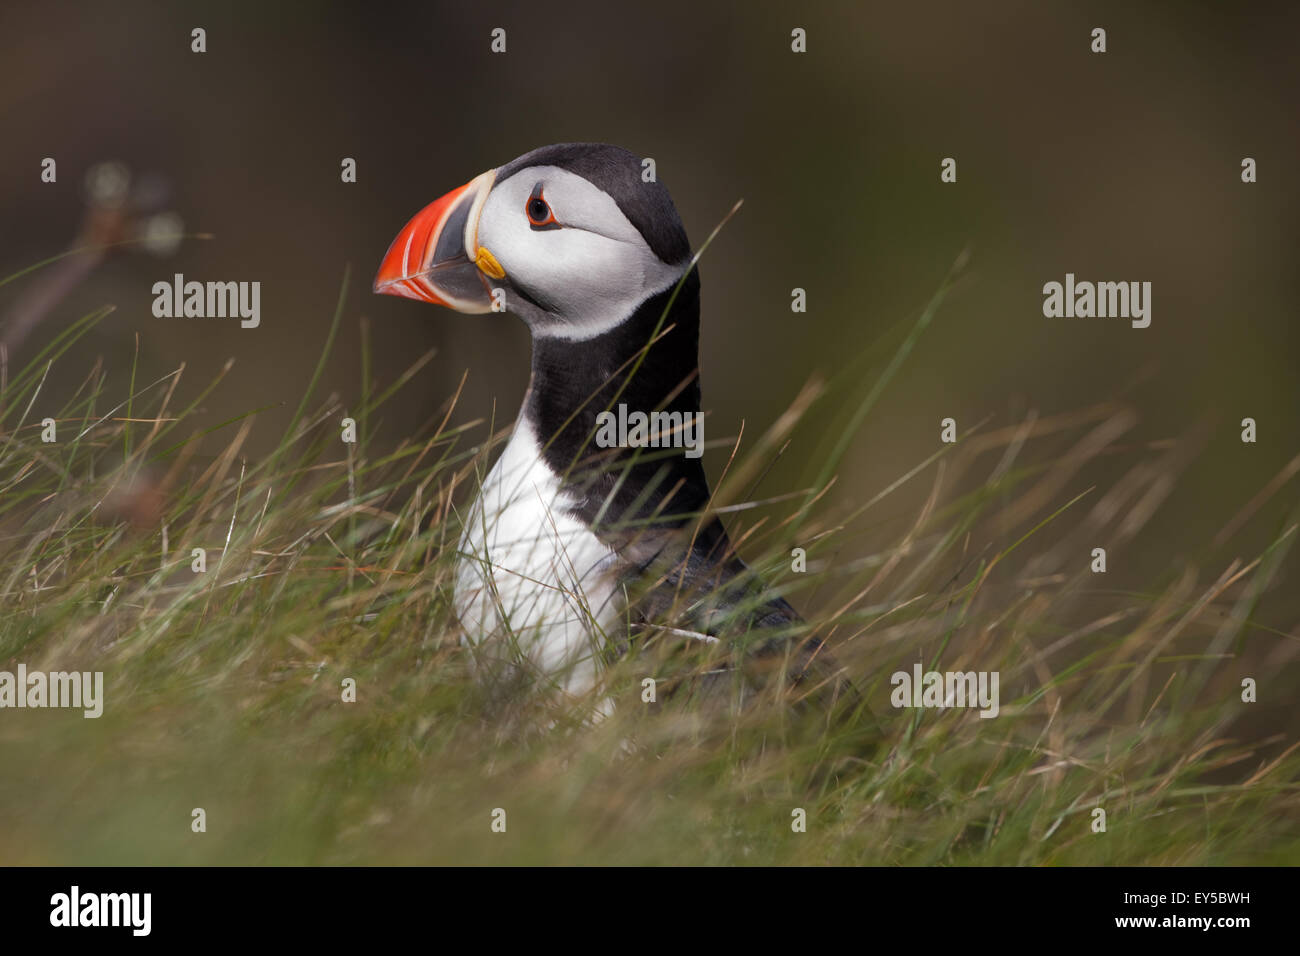 Puffin (Fratercula arctica). Breeding plumage. About to go down a nesting hole; obscured. June. Staffa. Inner Hebrides.SCOTLAND Stock Photo